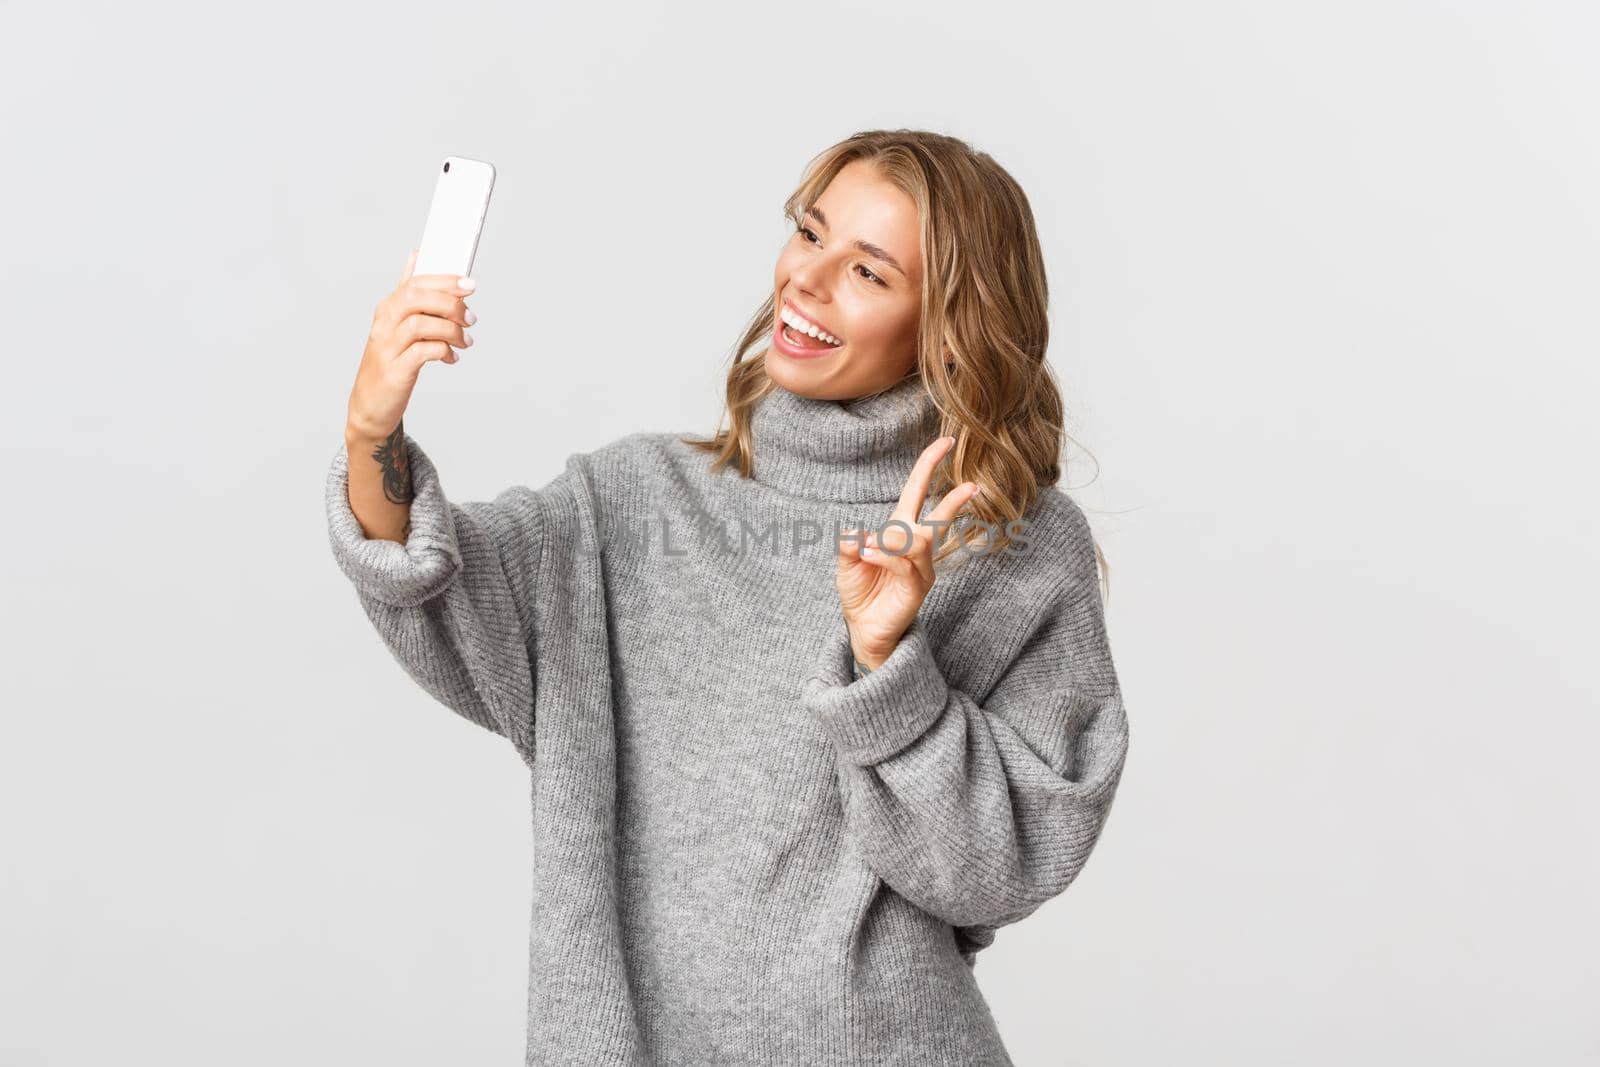 Portrait of attractive young blond girl in grey sweater holding smartphone, showing peace sign and taking selfie, standing over white background.